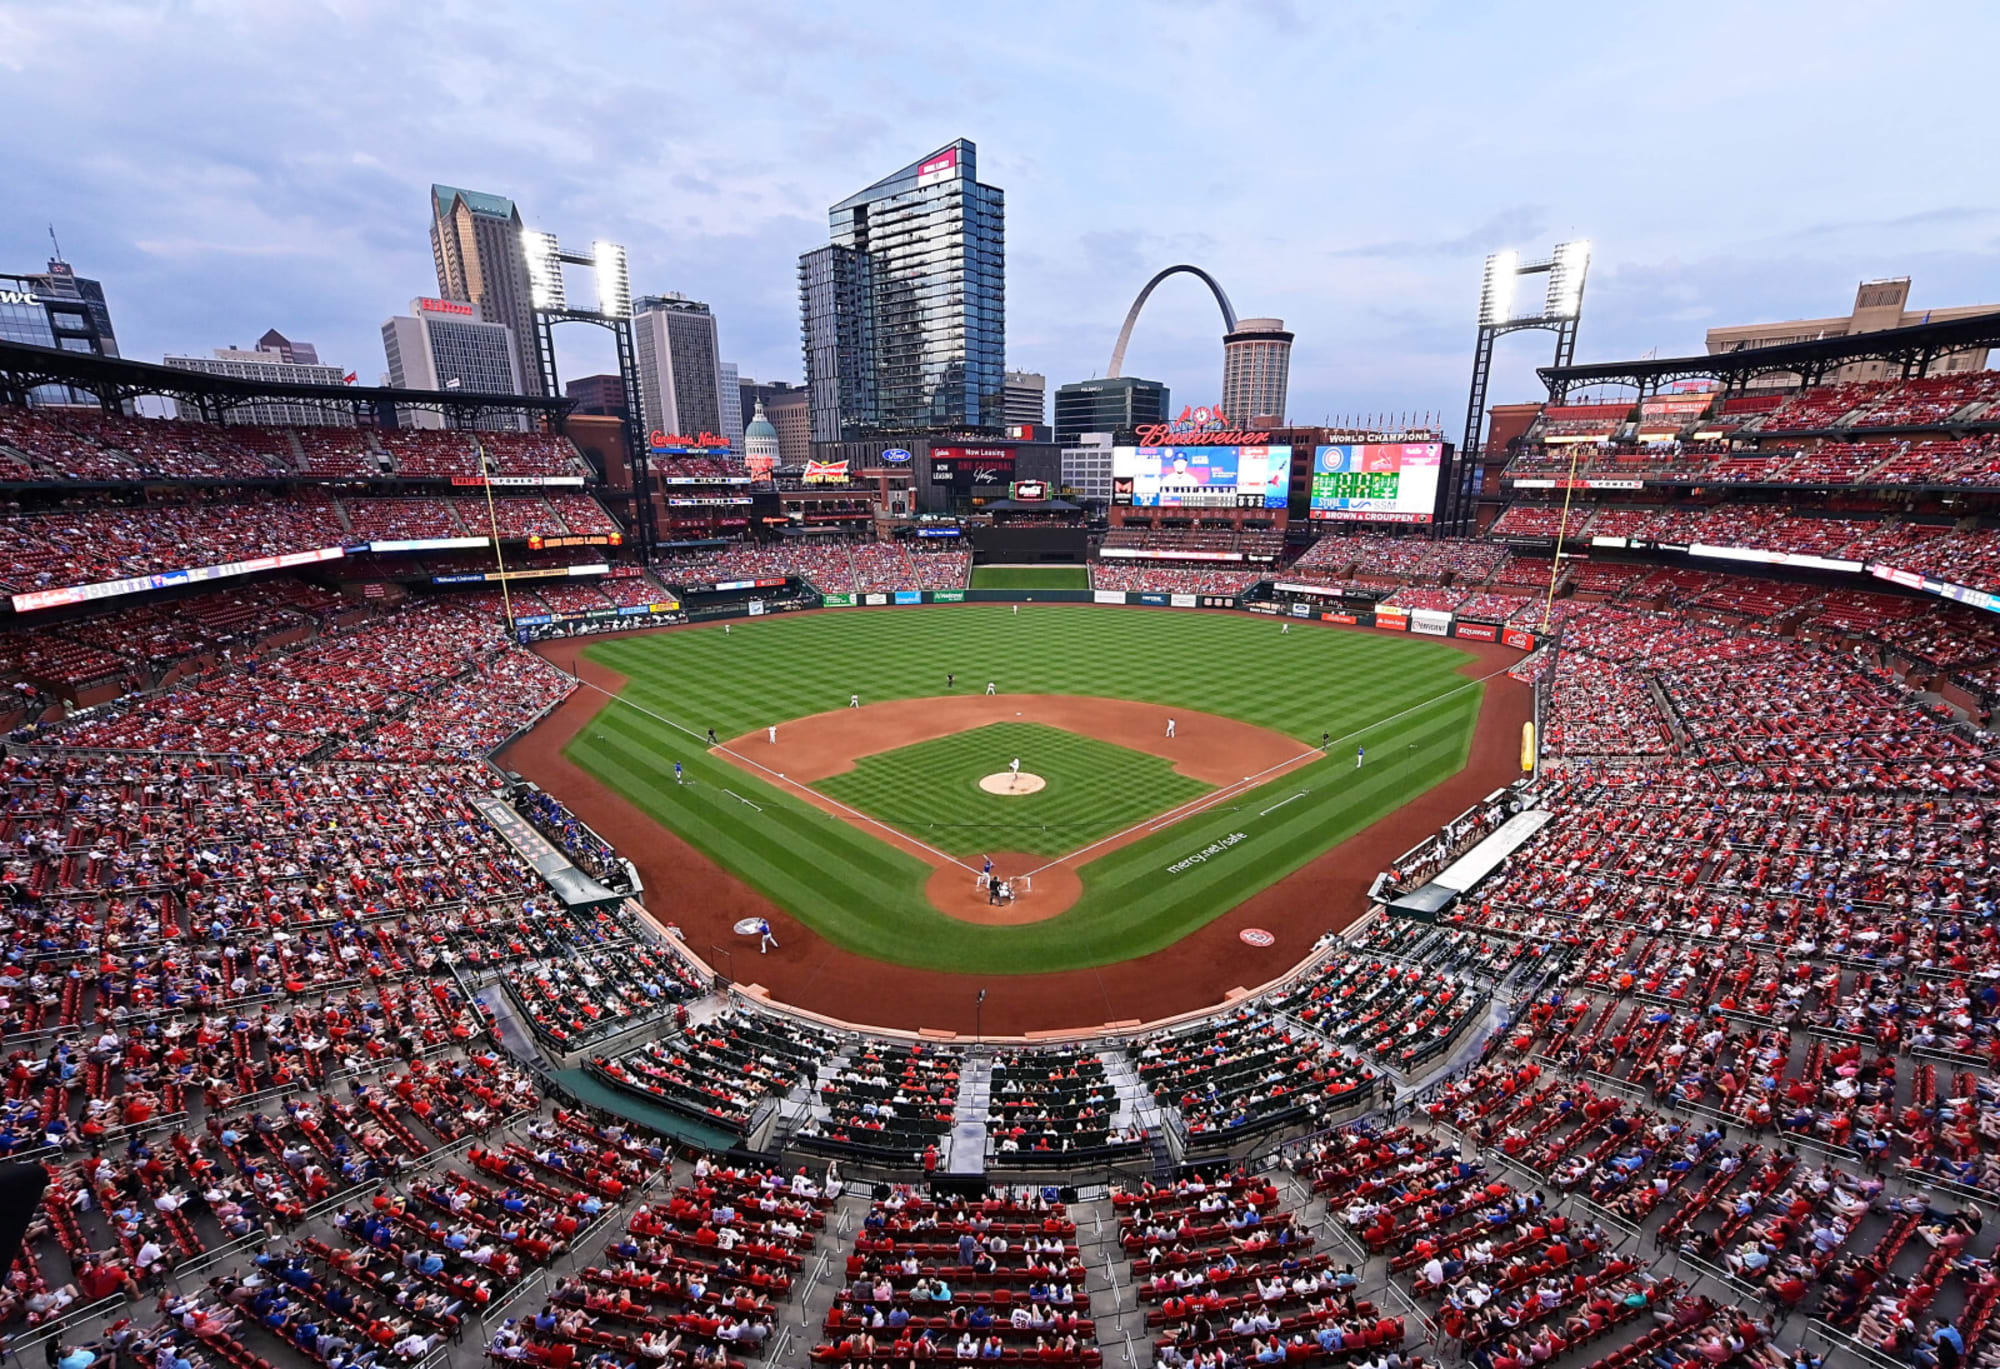 St. Louis Cardinals Imagining City Connect jersey possibilities